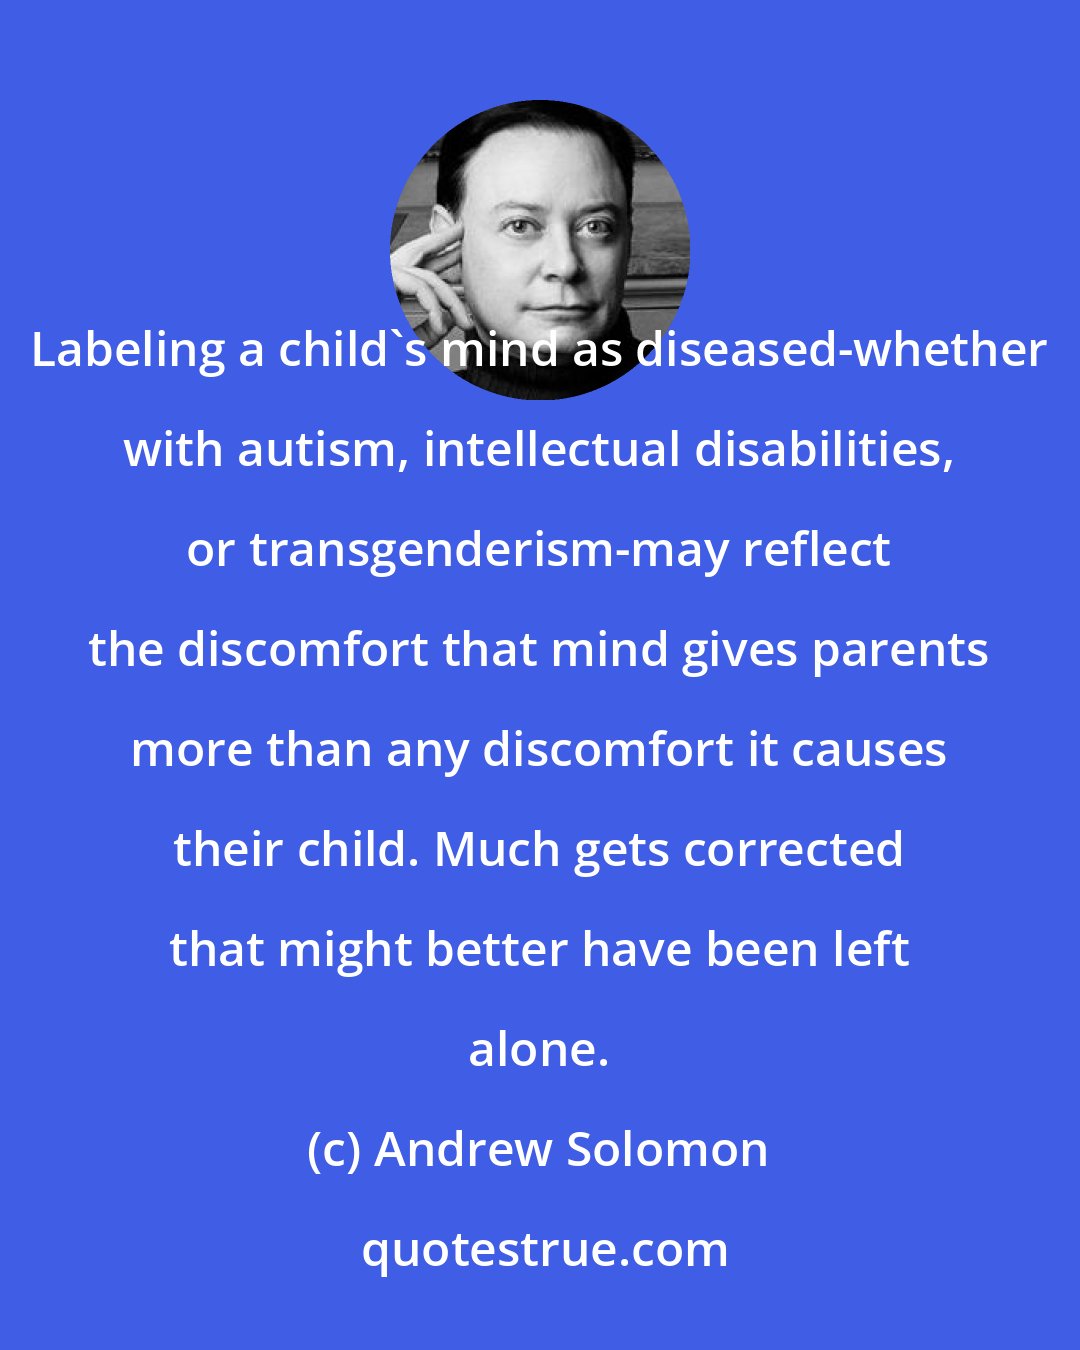 Andrew Solomon: Labeling a child's mind as diseased-whether with autism, intellectual disabilities, or transgenderism-may reflect the discomfort that mind gives parents more than any discomfort it causes their child. Much gets corrected that might better have been left alone.